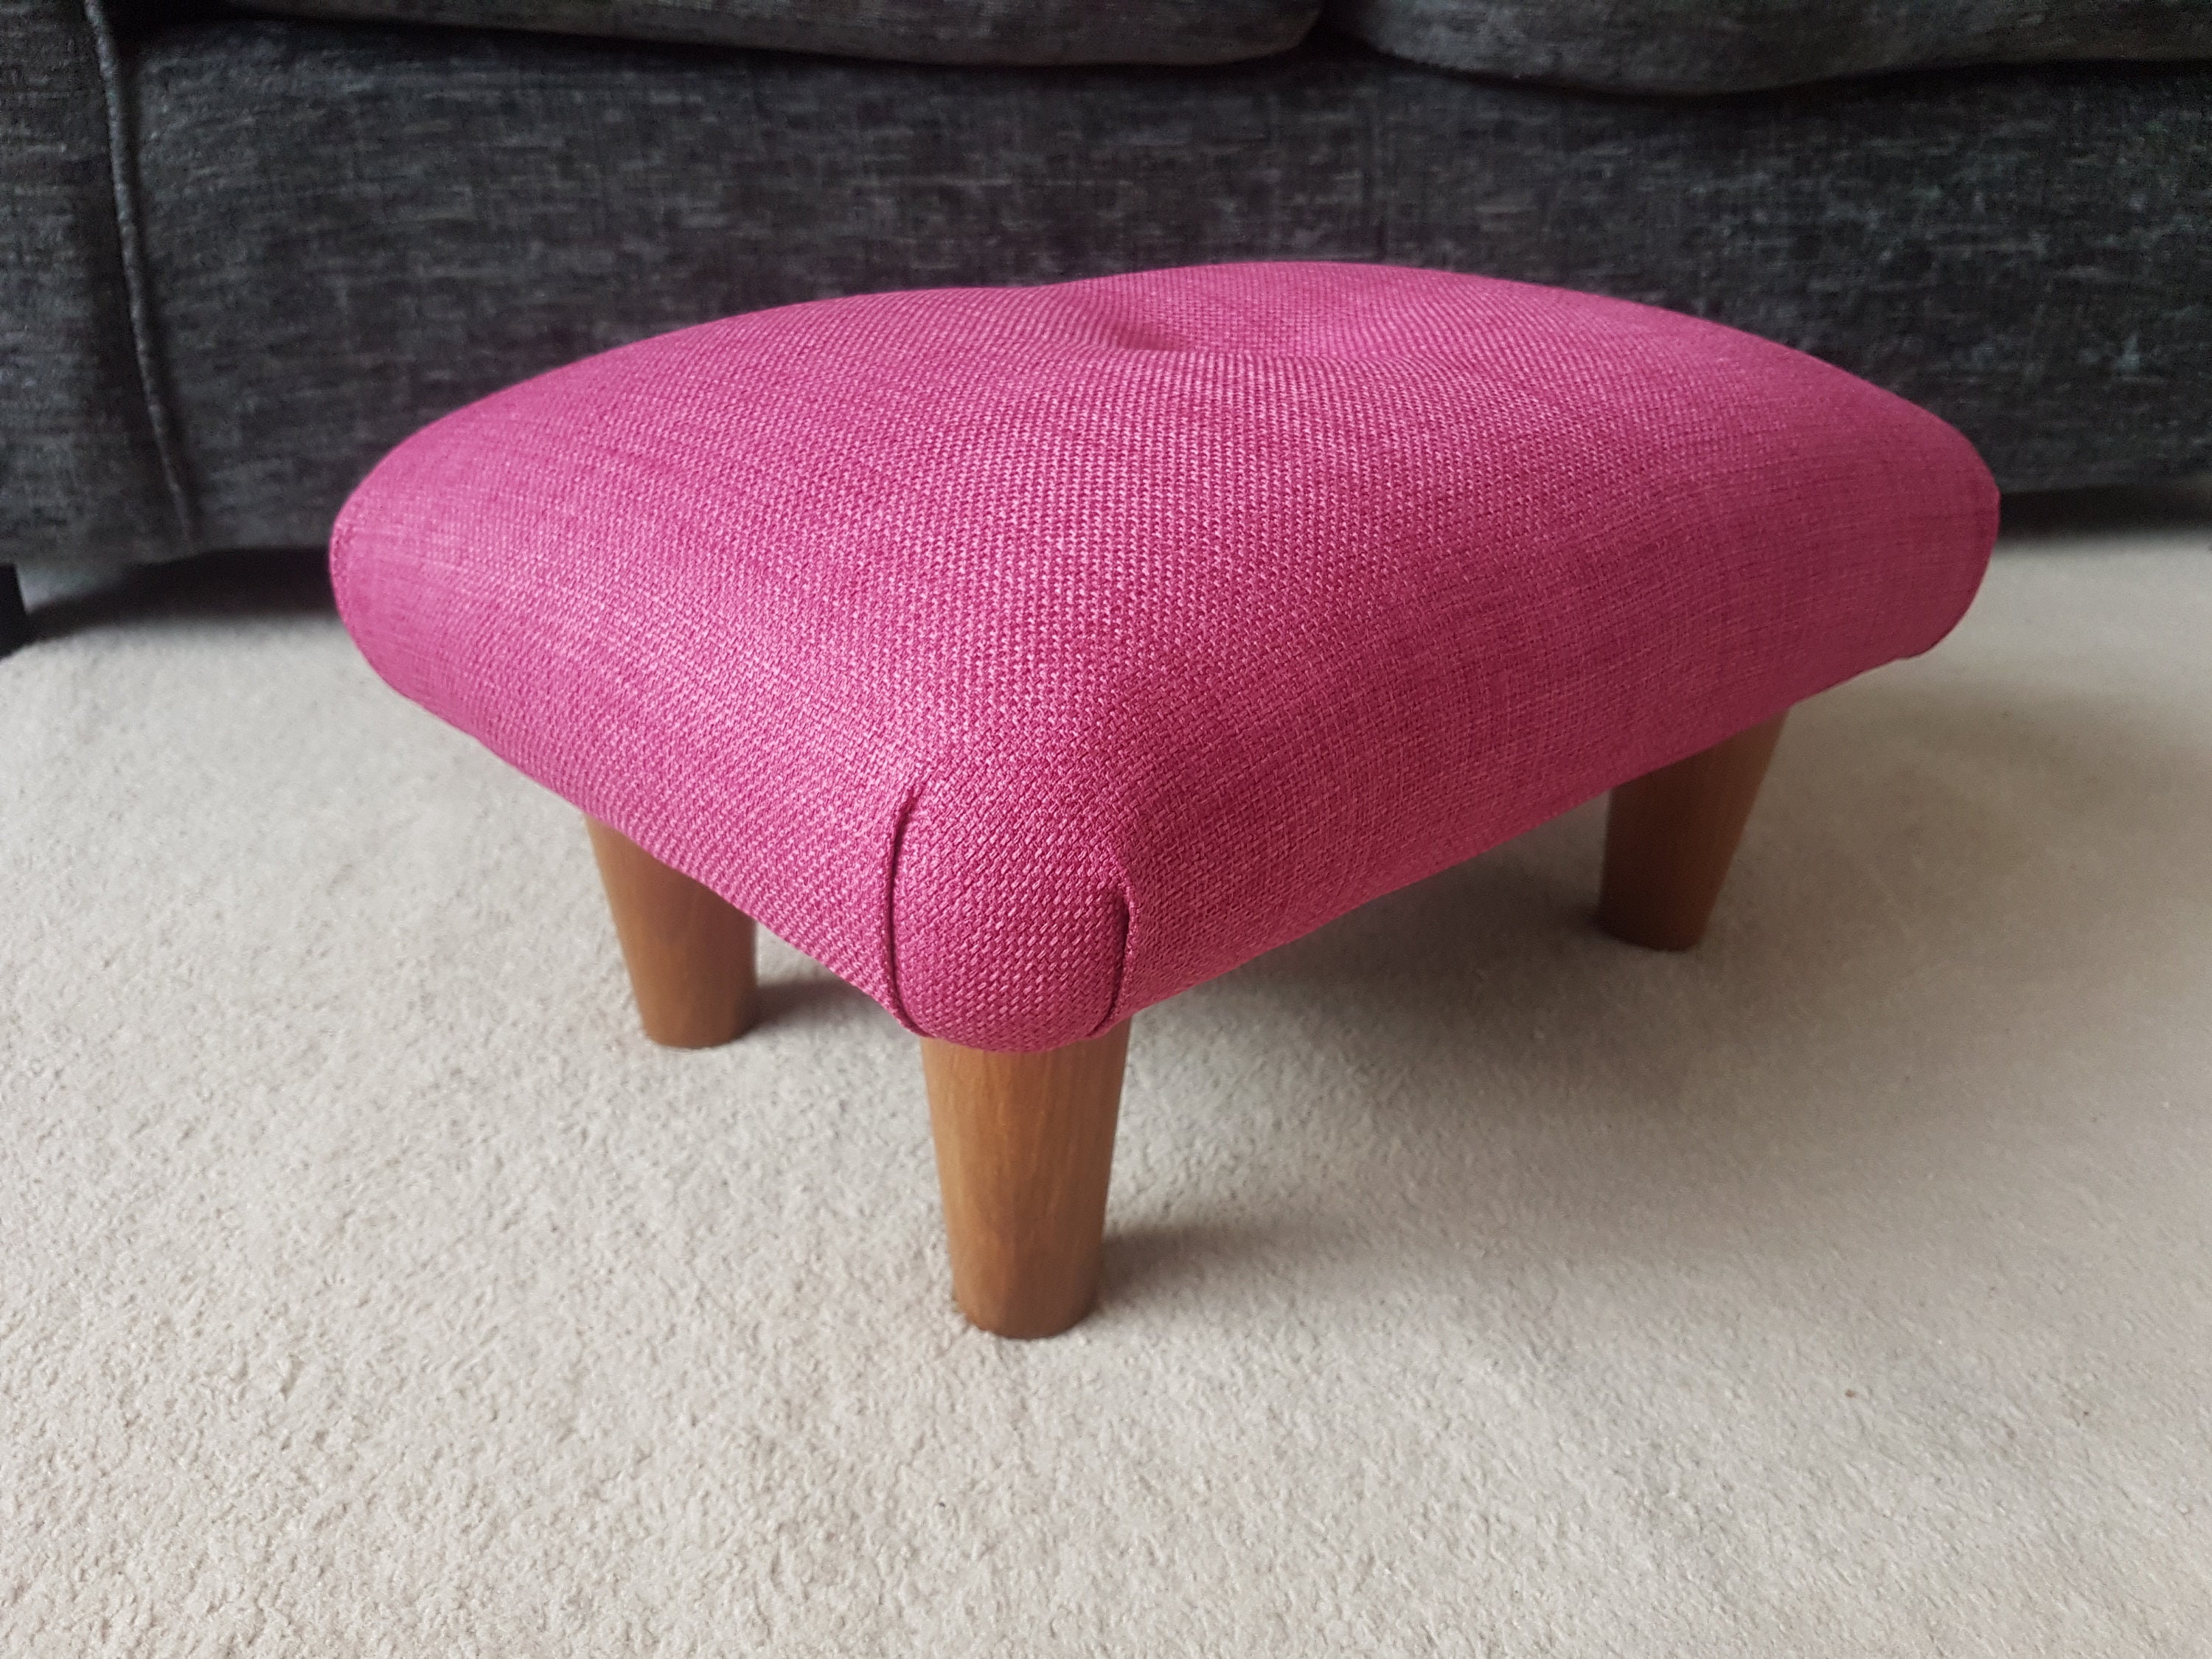 viewcare Pink Ottoman Foot Stool, Small Ottoman Foot Rest, Velvet Soft  Footrest Ottoman with Wood Legs, Sofa Footrest Extra Seating for Living  Room